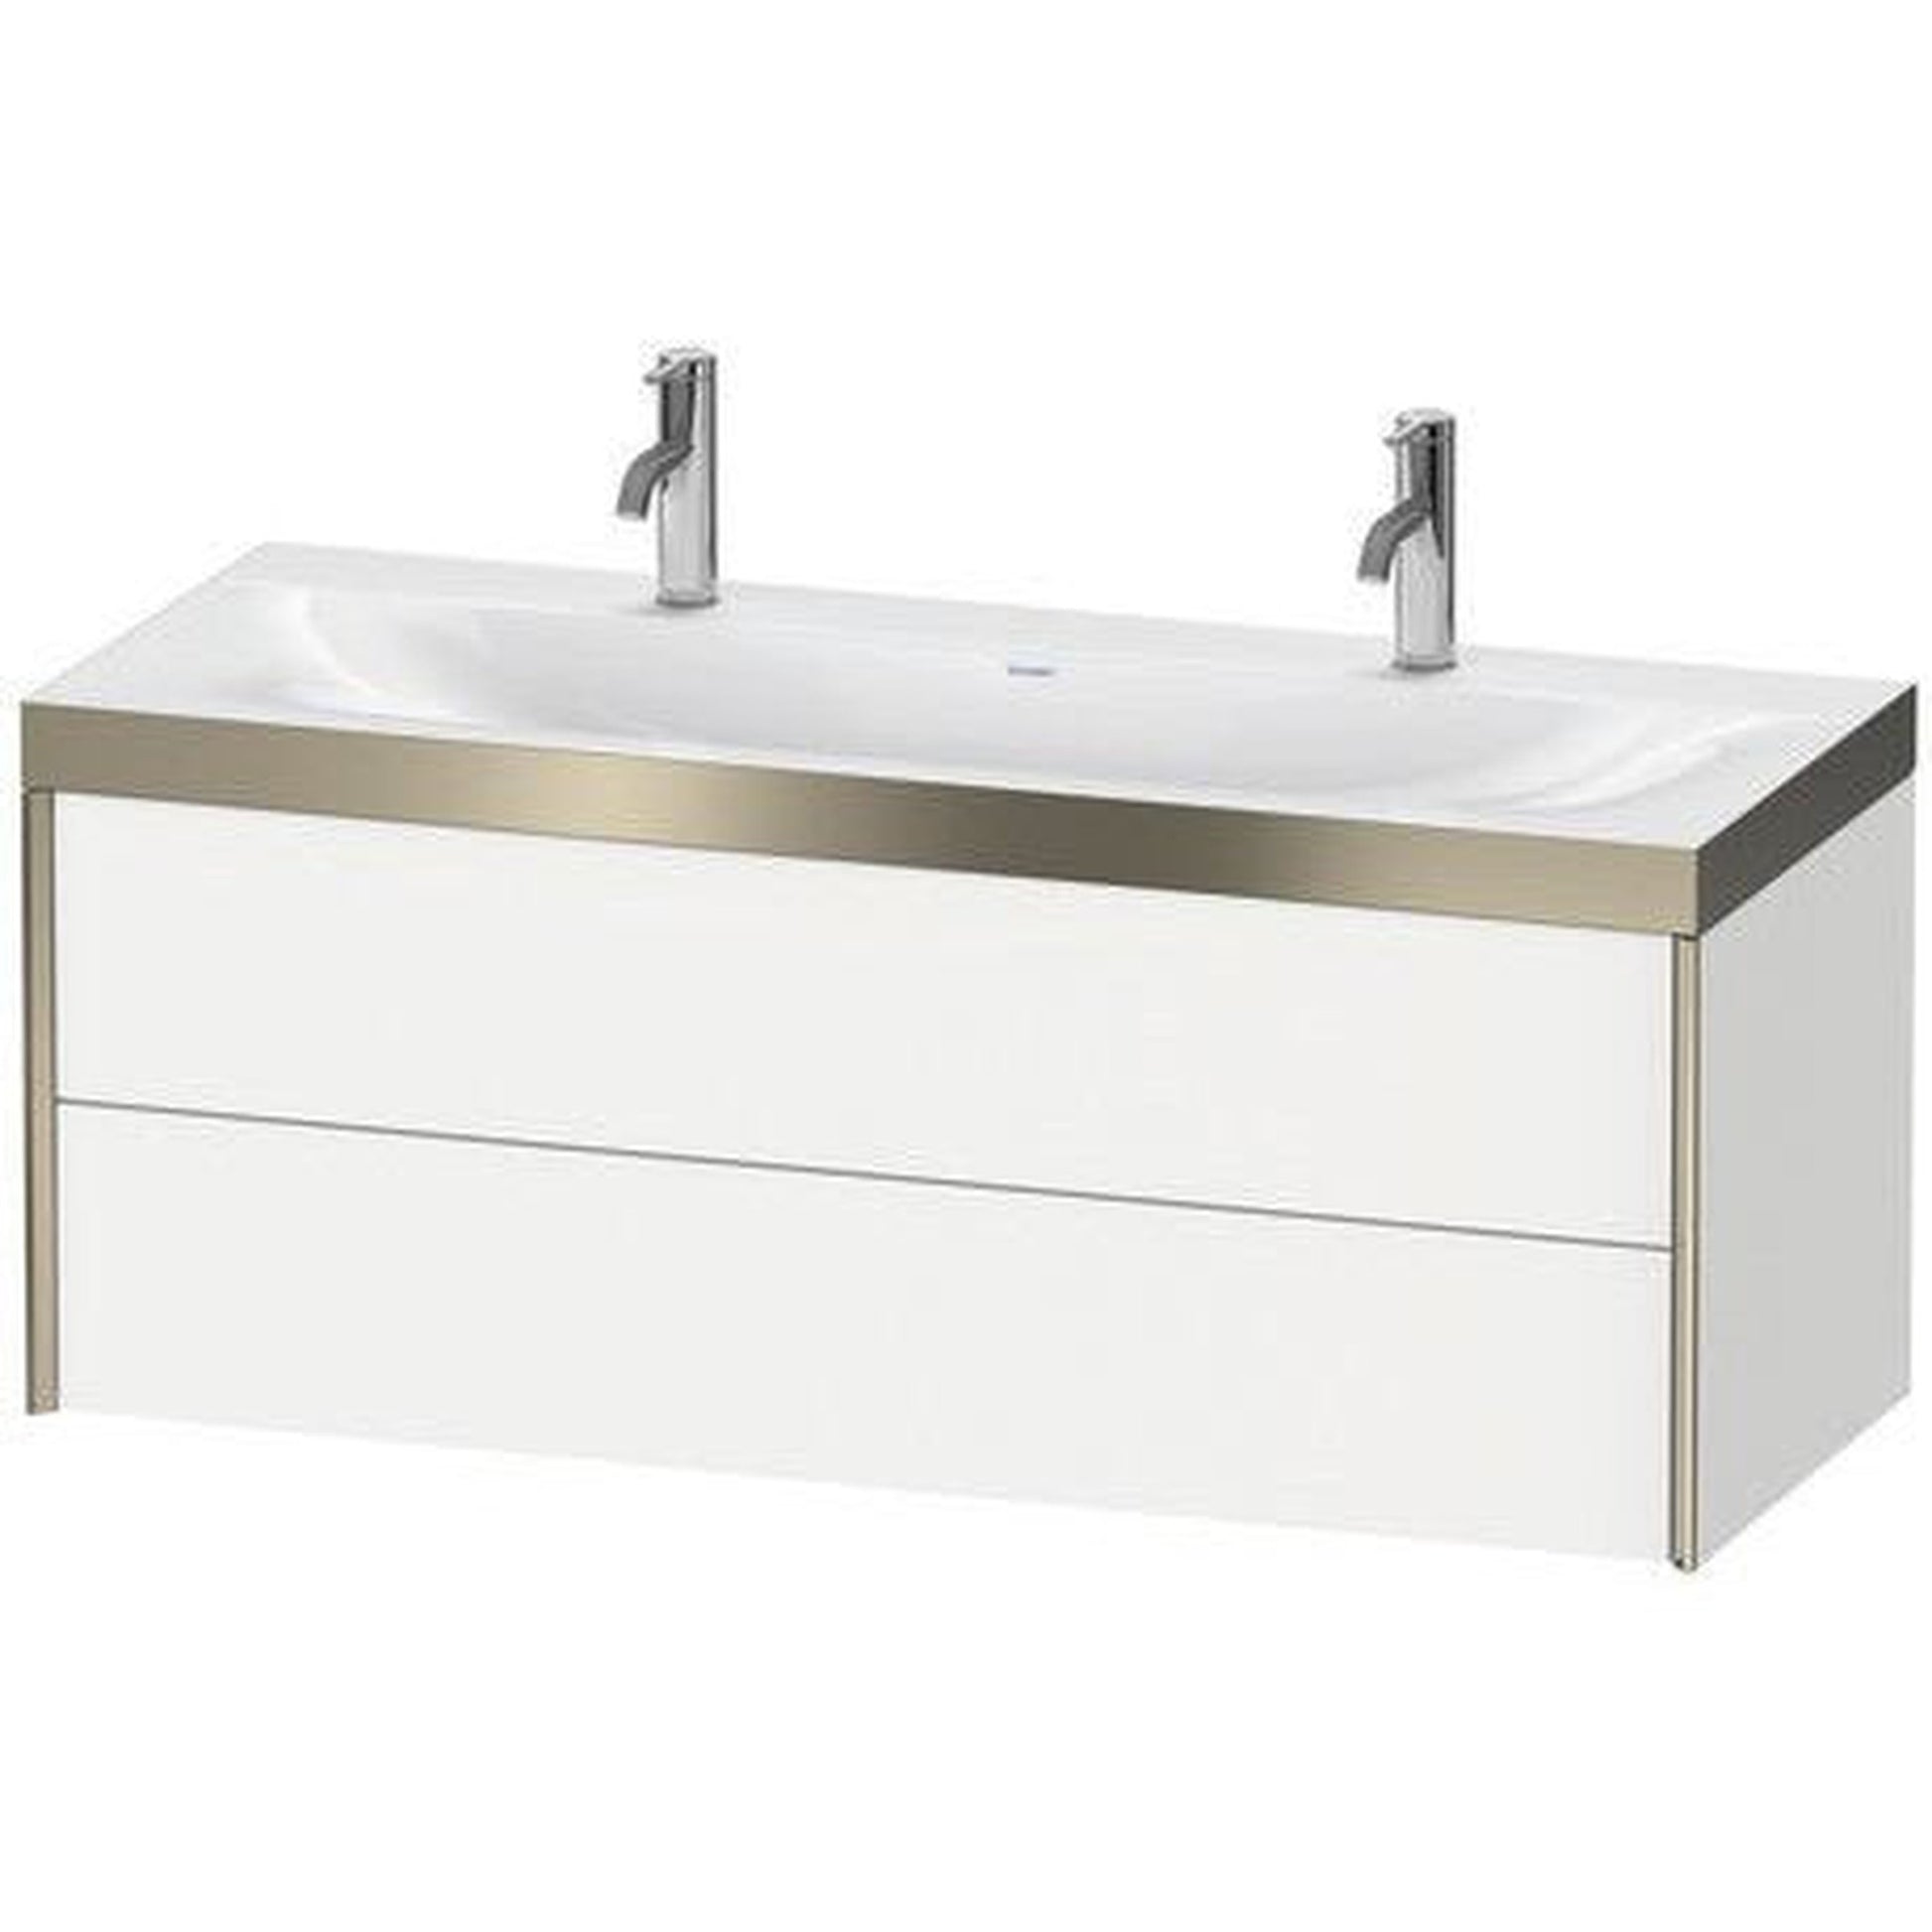 Duravit Xviu 47" x 20" x 19" Two Drawer C-Bonded Wall-Mount Vanity Kit With One Tap Hole, Flannel Gray (XV4618OB289C)